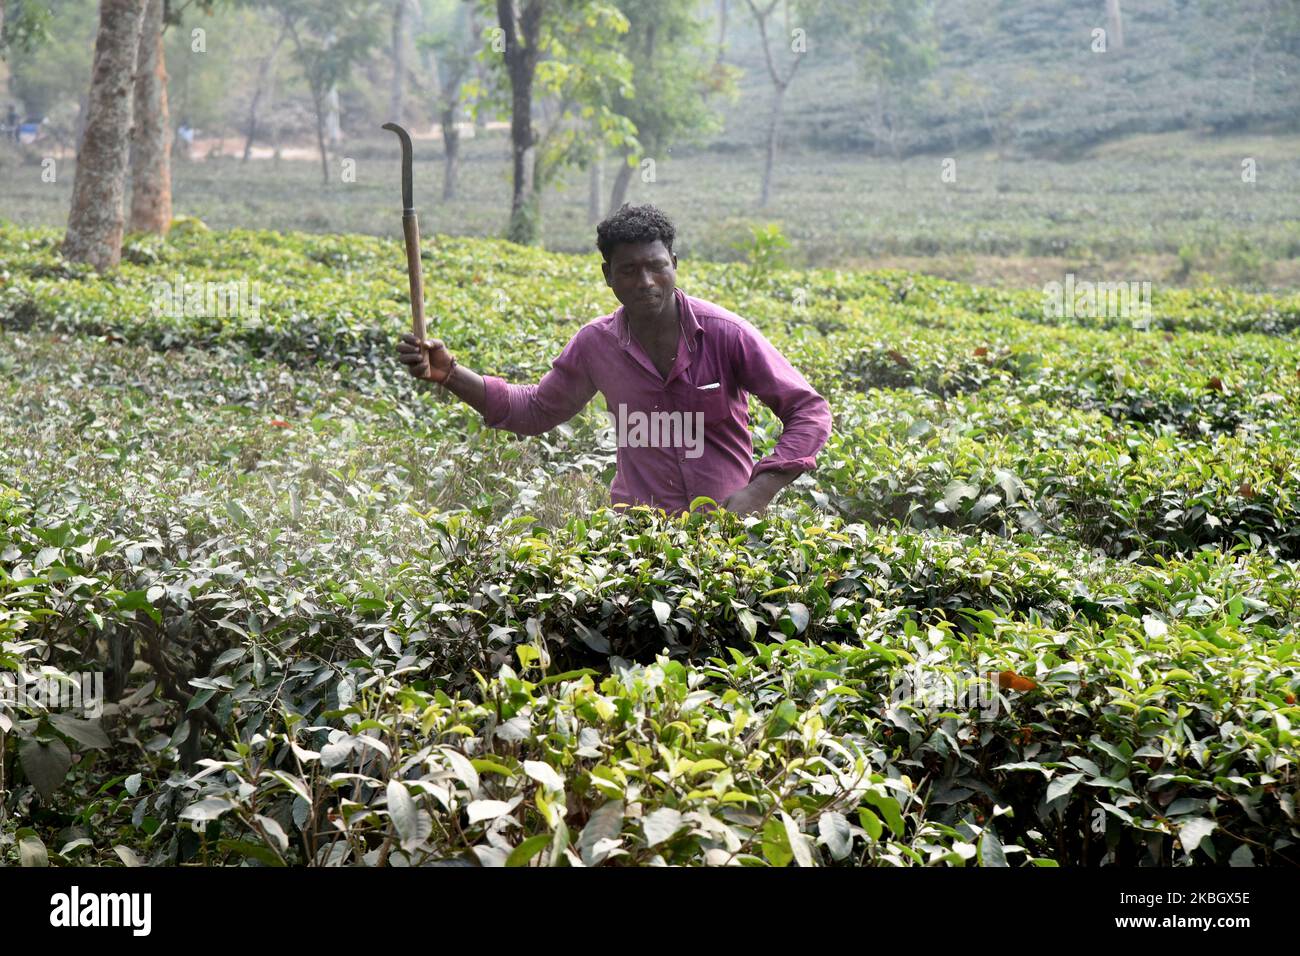 Bangladeshi man working in a tea garden in Sylhet, Bangladesh, on February 11, 2020. Tea Plucking is a specialized skill. Two leaves and a bud need to be plucked in order to get the best taste and profitability. The calculation of daily wage is 75tk(1$) for plucking at least 22-23 kg leaves per day for a worker. The area of Sylhet has over 150 gardens including three of the largest tea gardens in the world both in area and production. Nearly 300,000 workers are employed on the tea estates of which over 75% are women but they are passing their lives as a slave. (Photo by Mamunur Rashid/NurPhoto Stock Photo